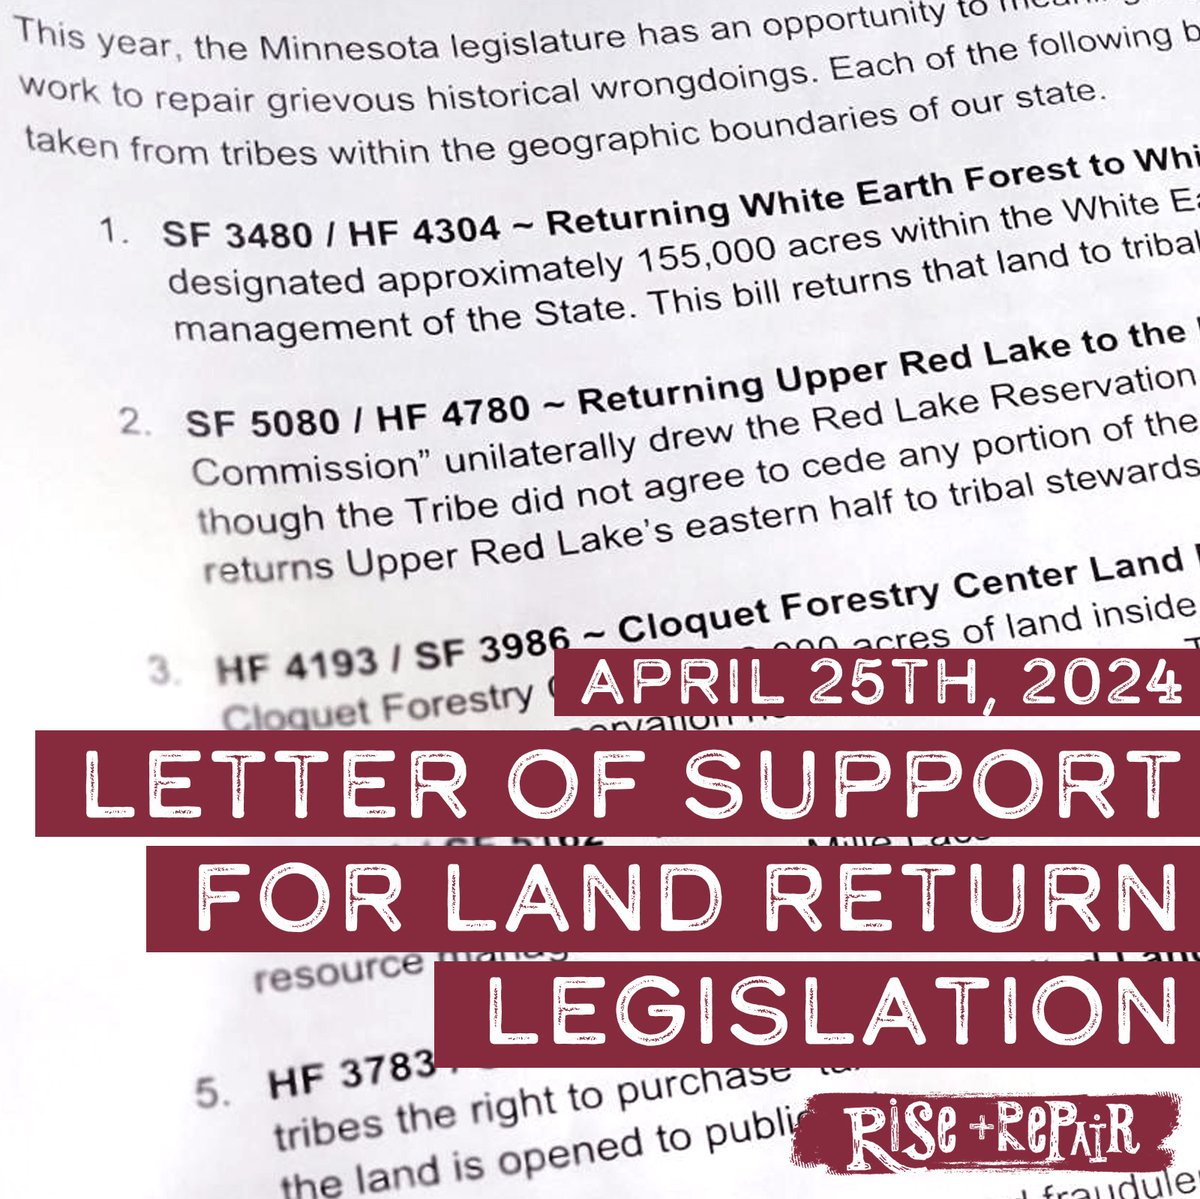 We have been disheartened by the misinformation on Land return bills proposed at the MN Legislature this session. We provided this insightful letter to every single member of the Legislature as part of Rise & Repair: riseandrepair.org/news/letter-of… #LandReturn #Idigenous #MnLeg